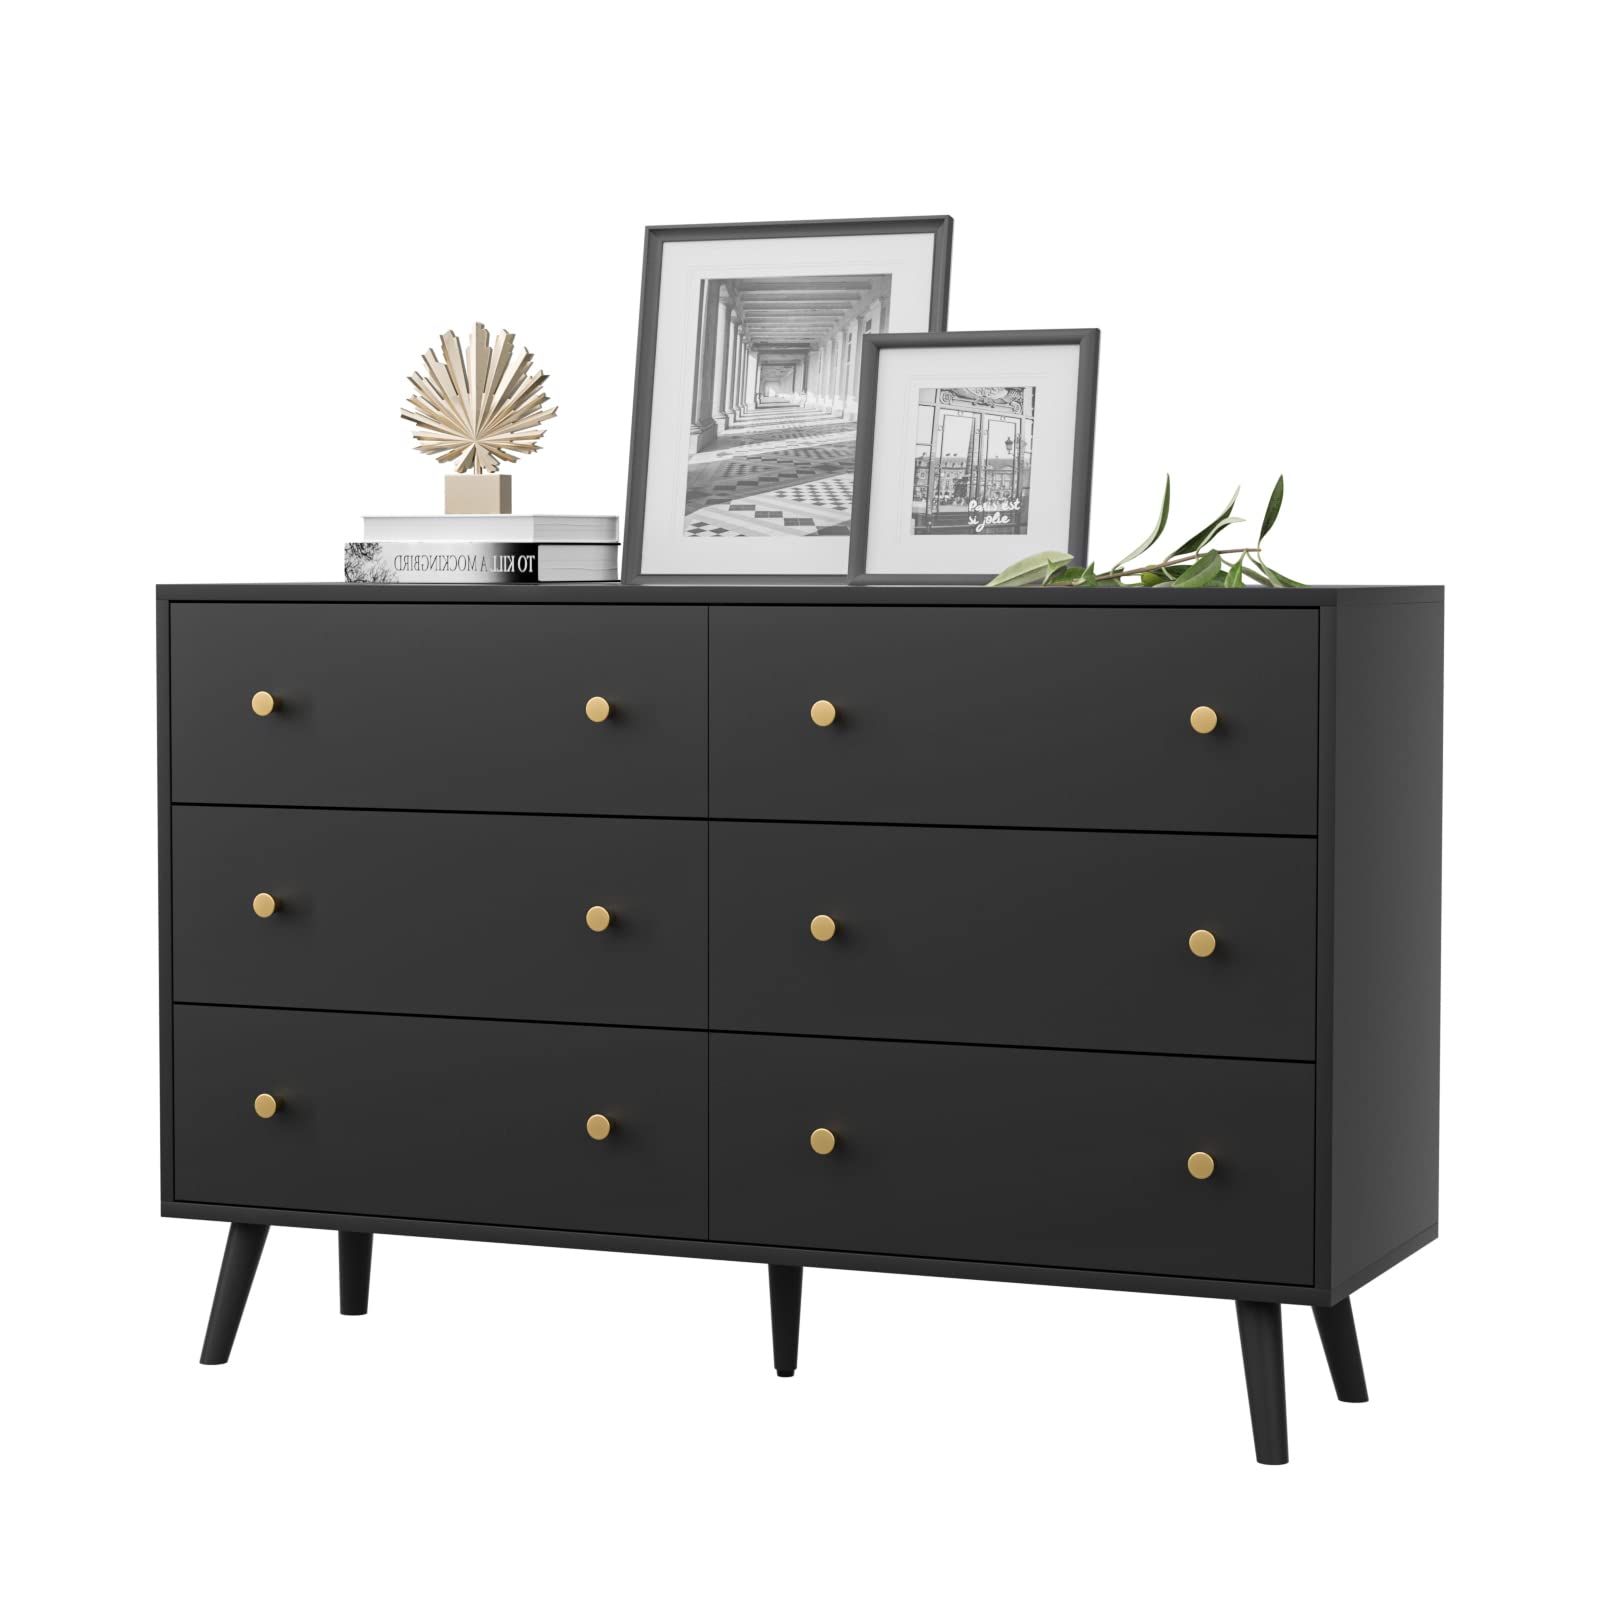 Dresser for Bedroom, Modern Black Dresser with 6 Drawers, Wide Chest of Drawers with Gold Handles | Amazon (US)